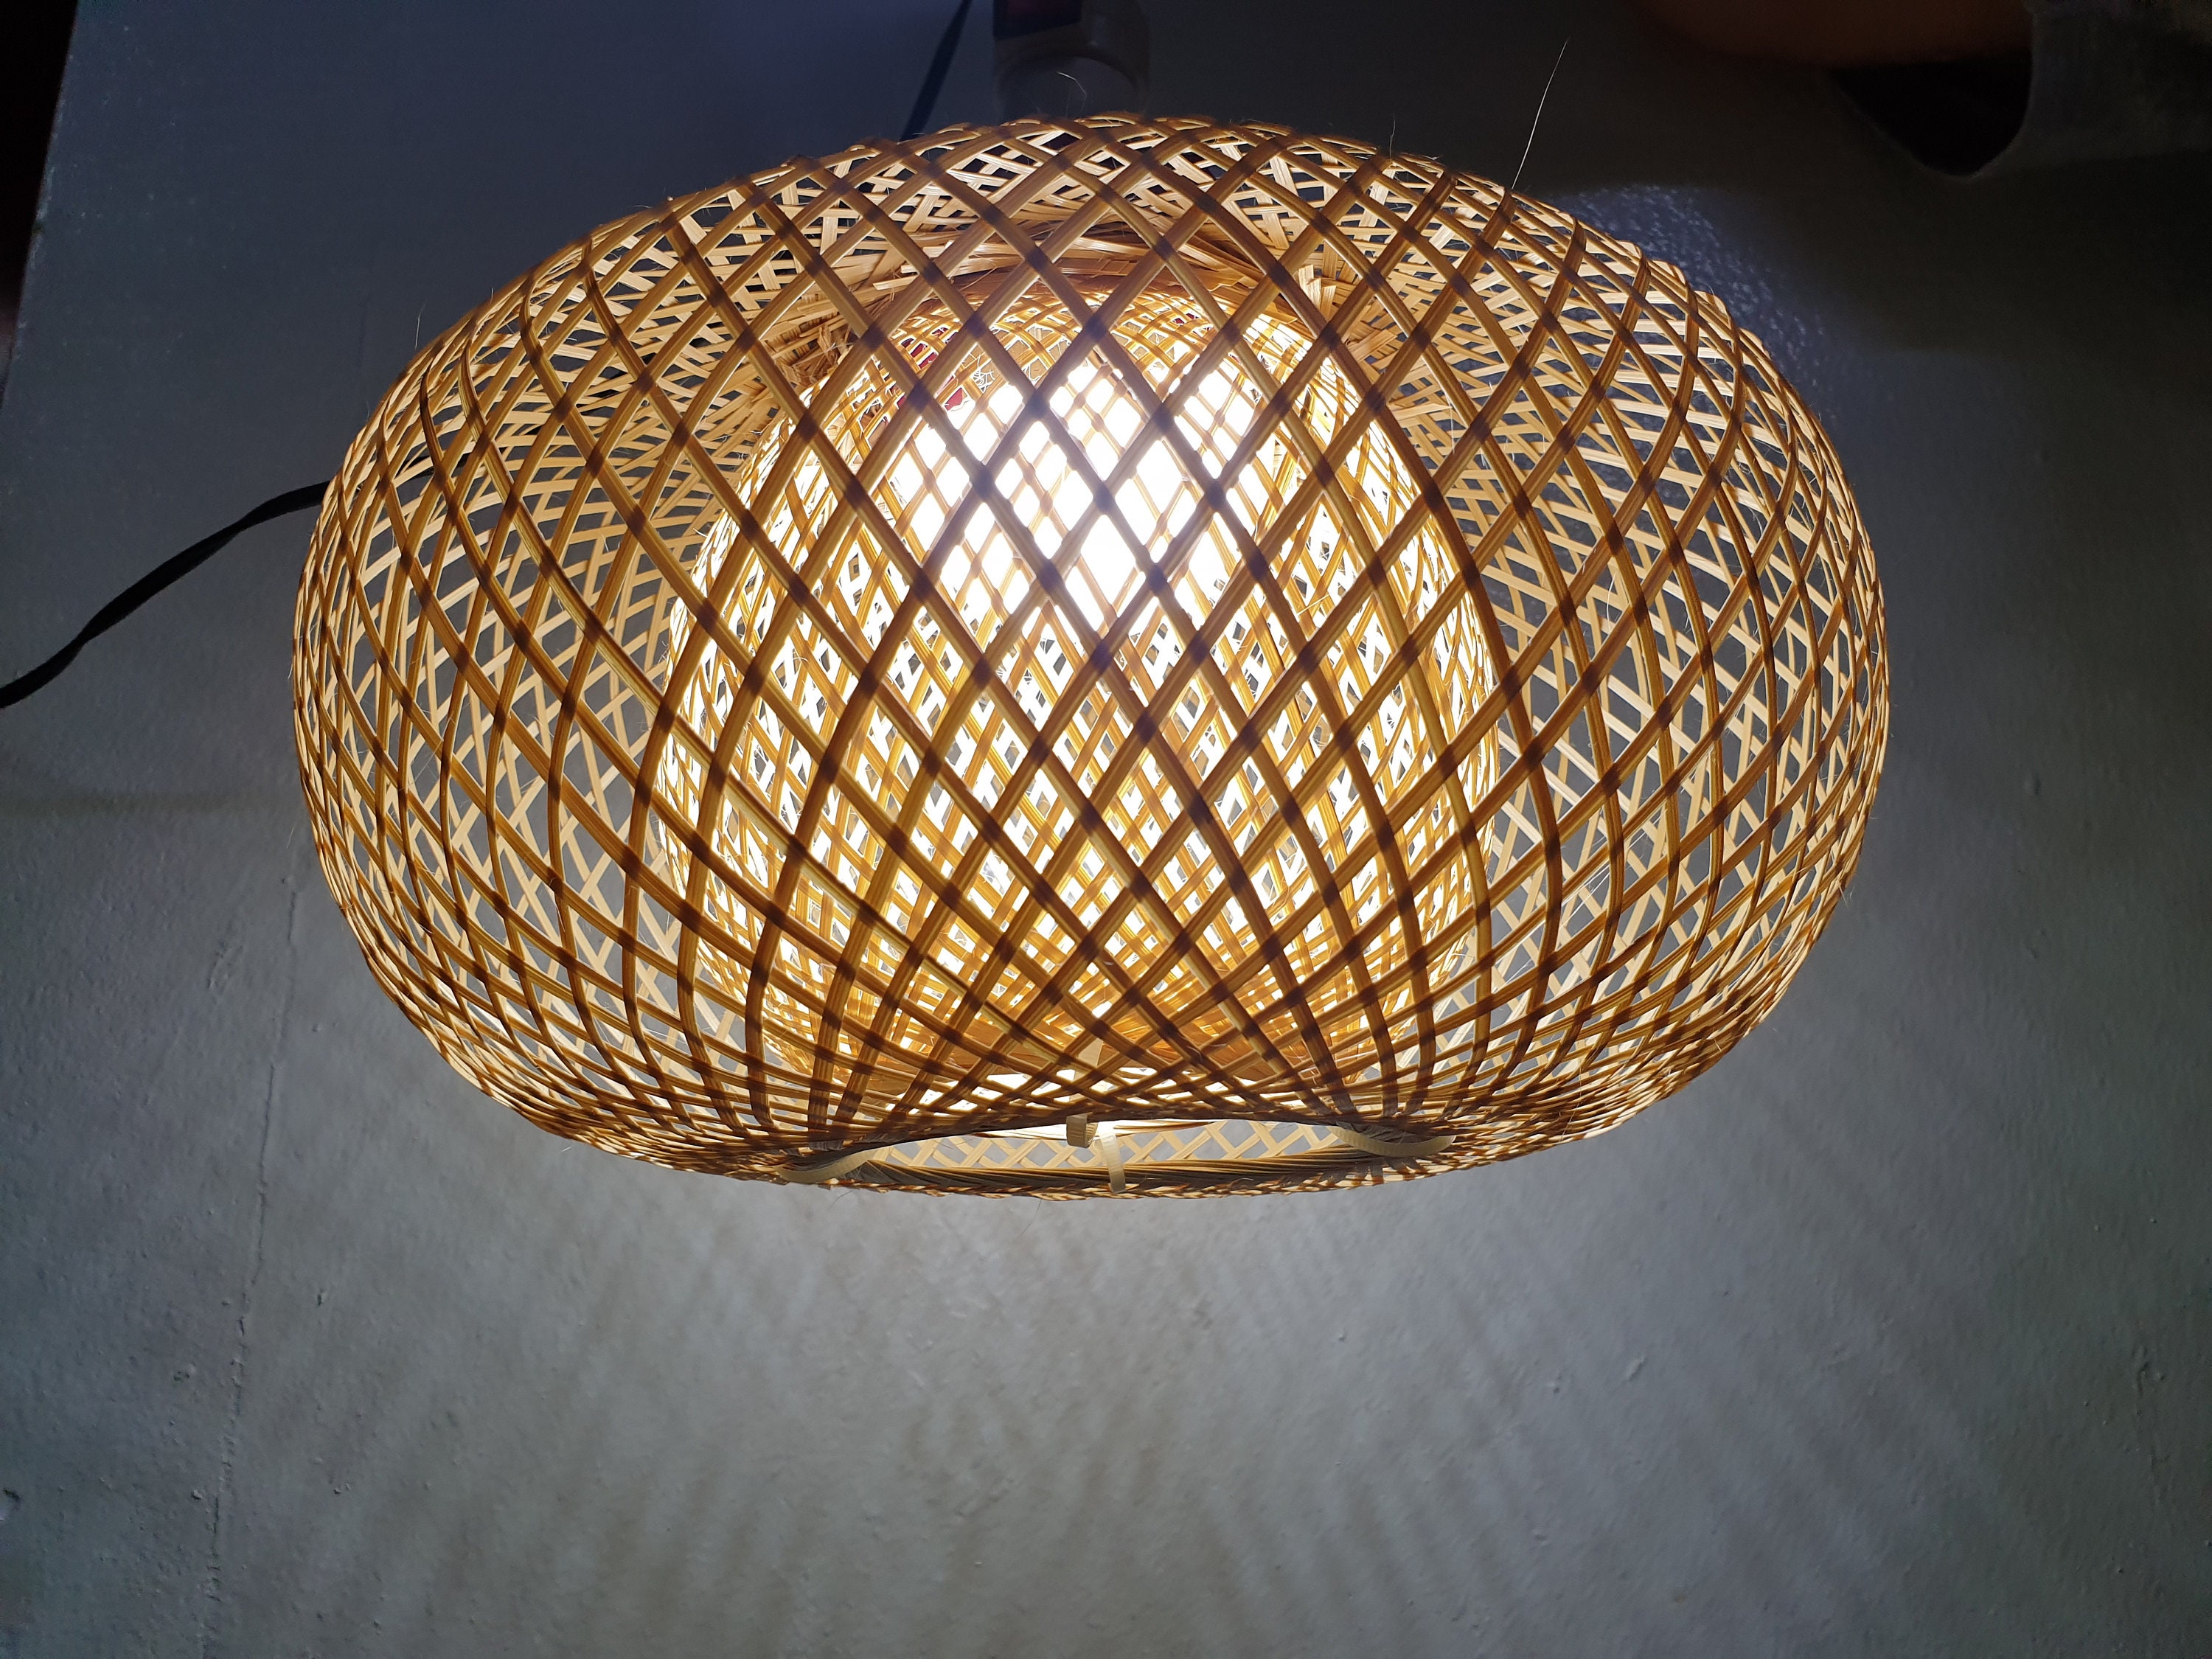 Bamboo Hanging Lamp Witch hat Style Pendant Light Asian Oblong Repurposed Fish Trap Ceiling Lamp